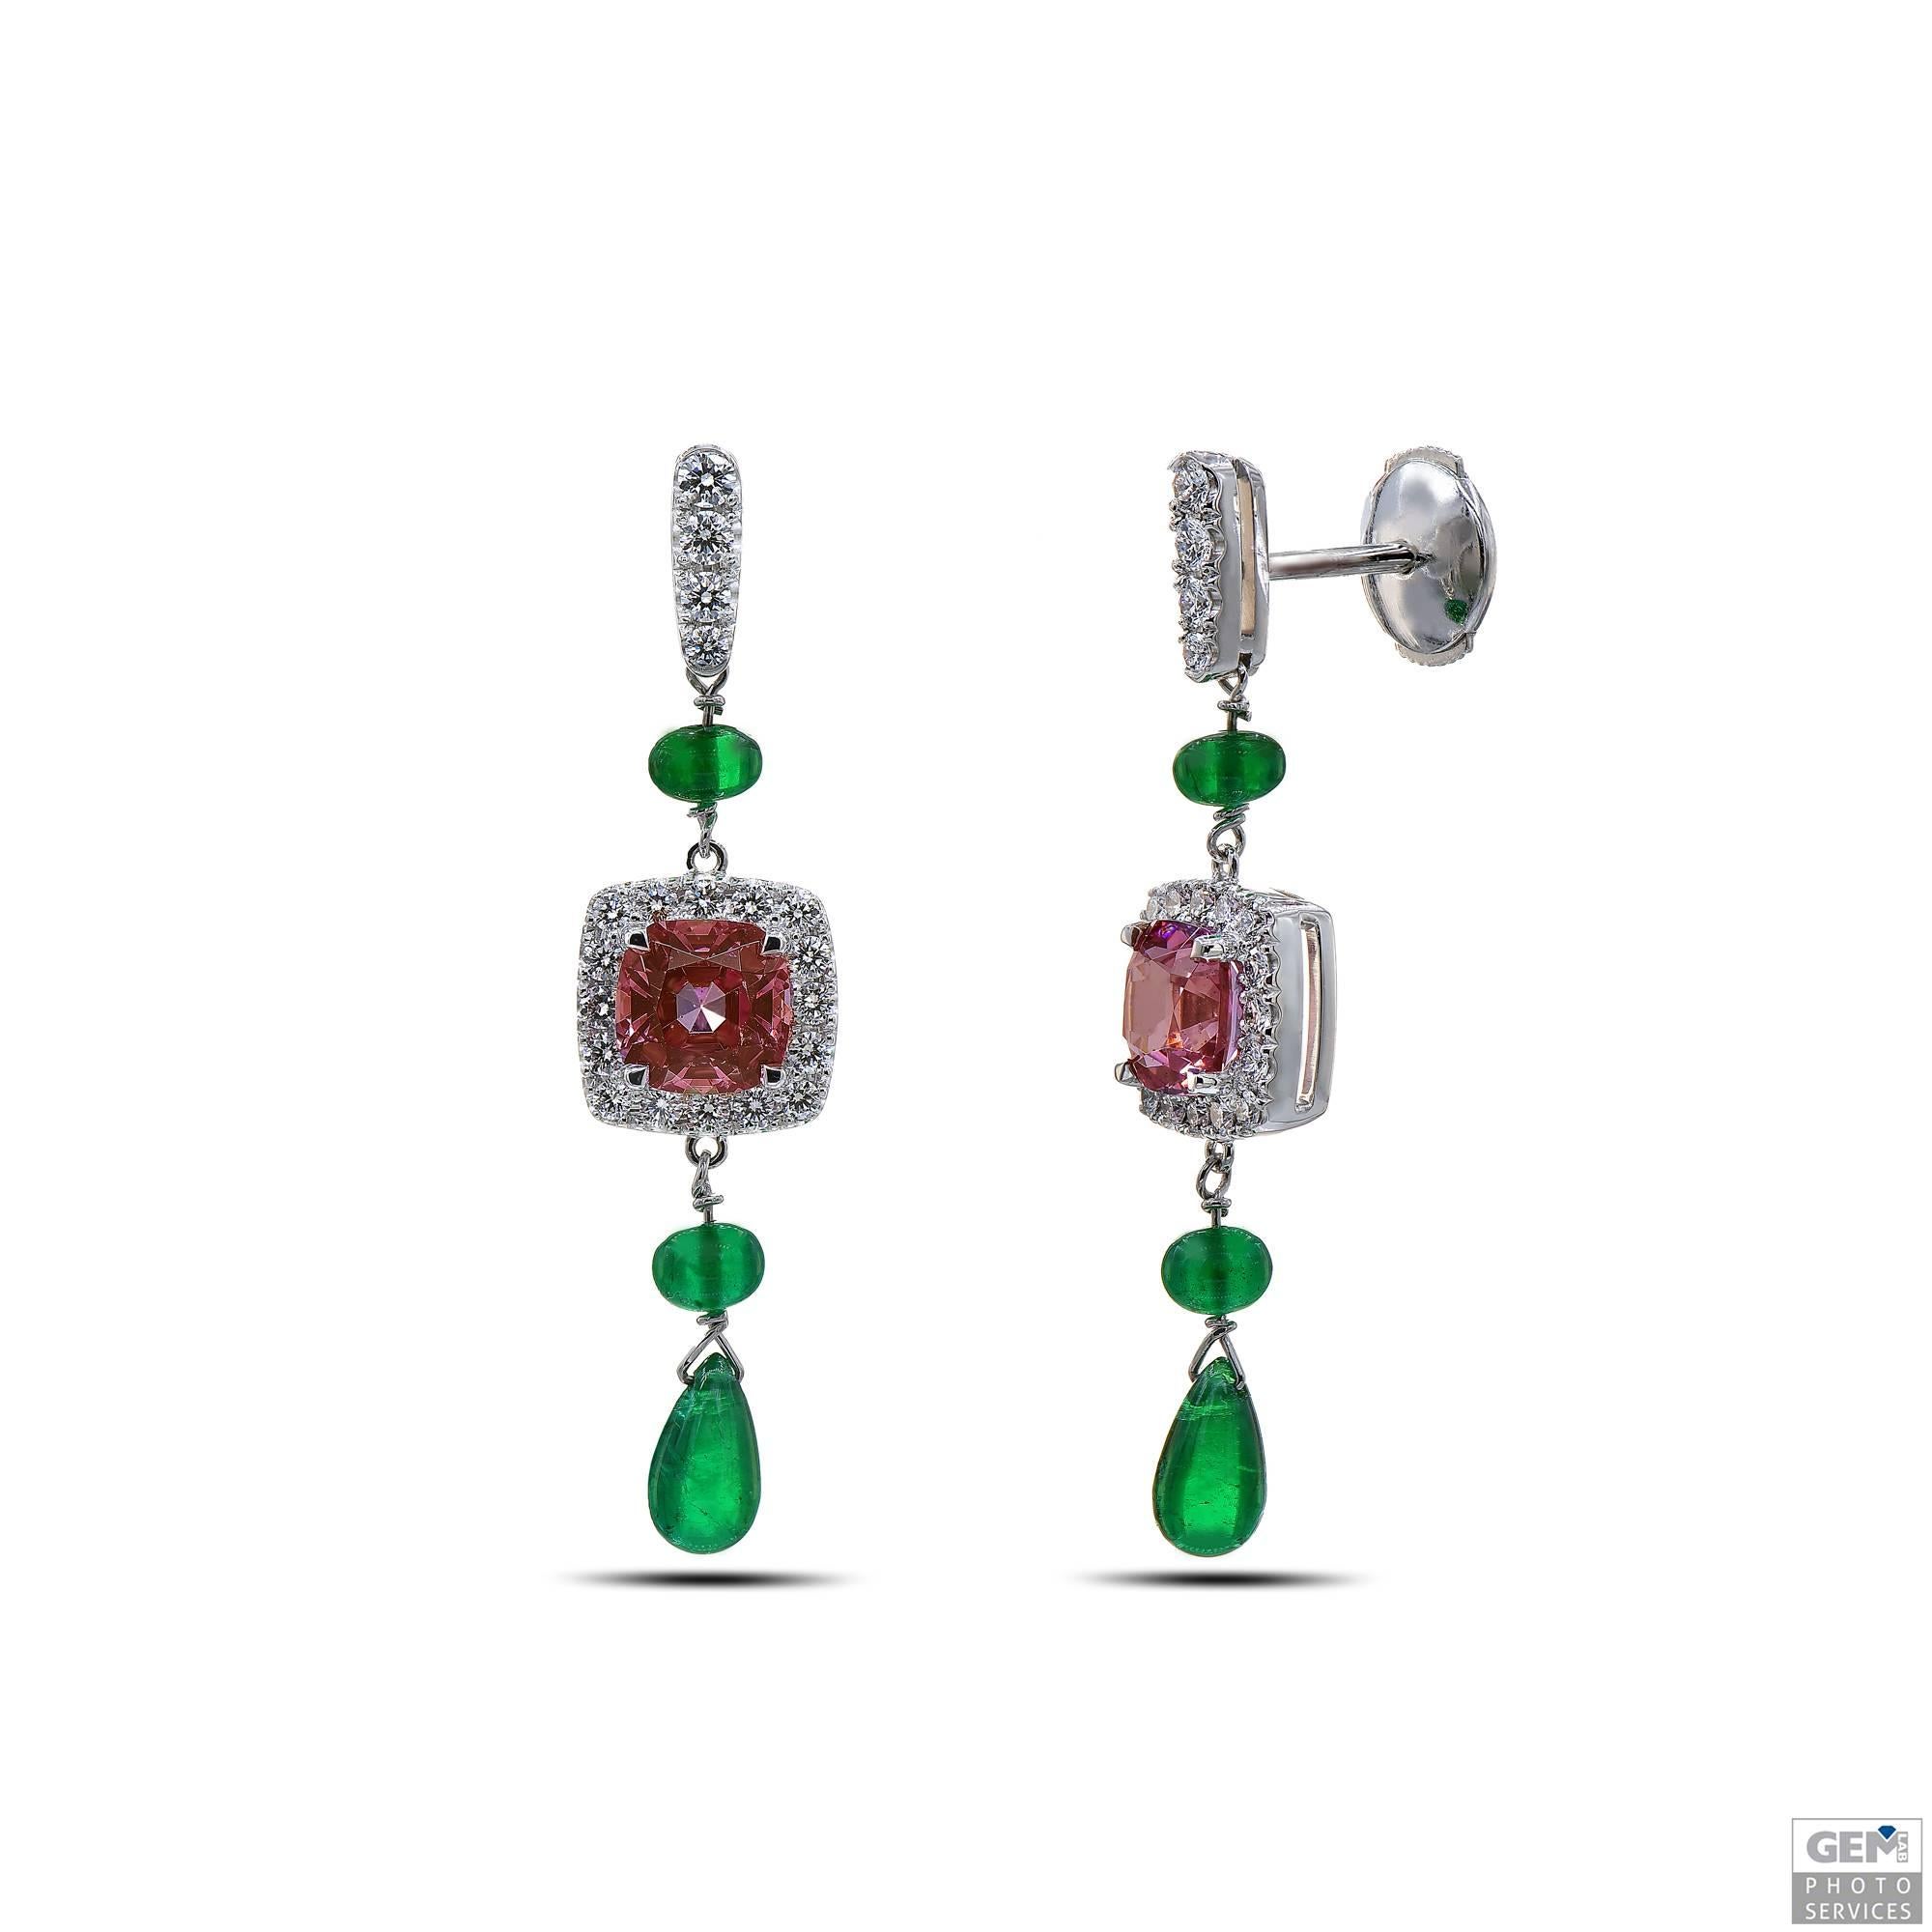 Very fine and colorful drop earrings by Carigi. The central cushion cut gemstones used for this design, are a perfect couple of Malayan Garnet with a combined weight of 3,03 carat. The color is very unique. It has shades of red, brown, pink and